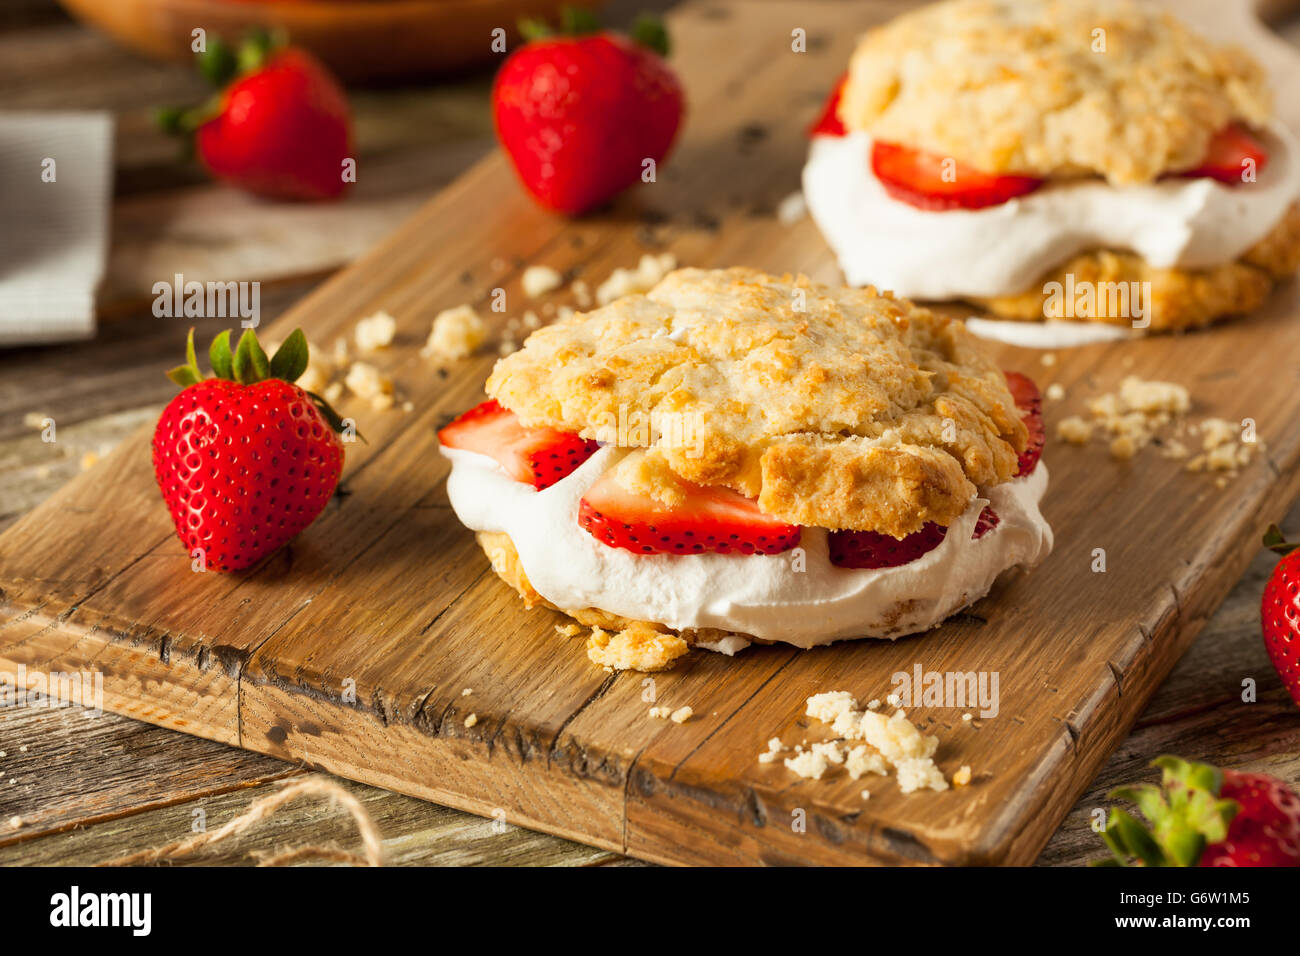 Homemade Strawberry Shortcake with Whipped Cream Ready to Eat Stock Photo